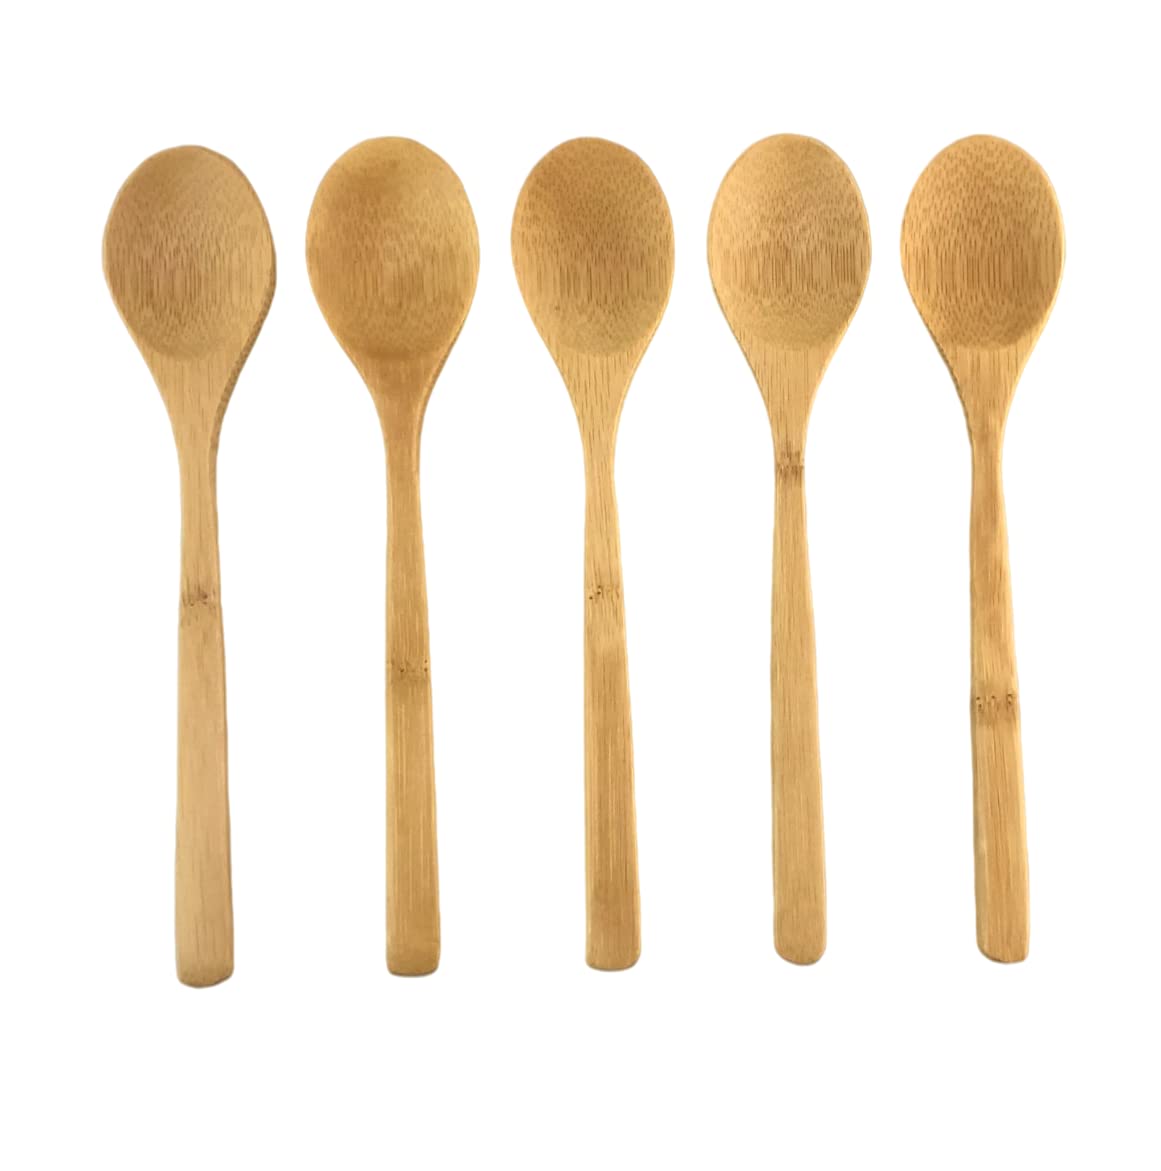 JapanBargain 3807, Pack of 10 Solid Bamboo Dinner Spoons Soup Spoons, 8-inch